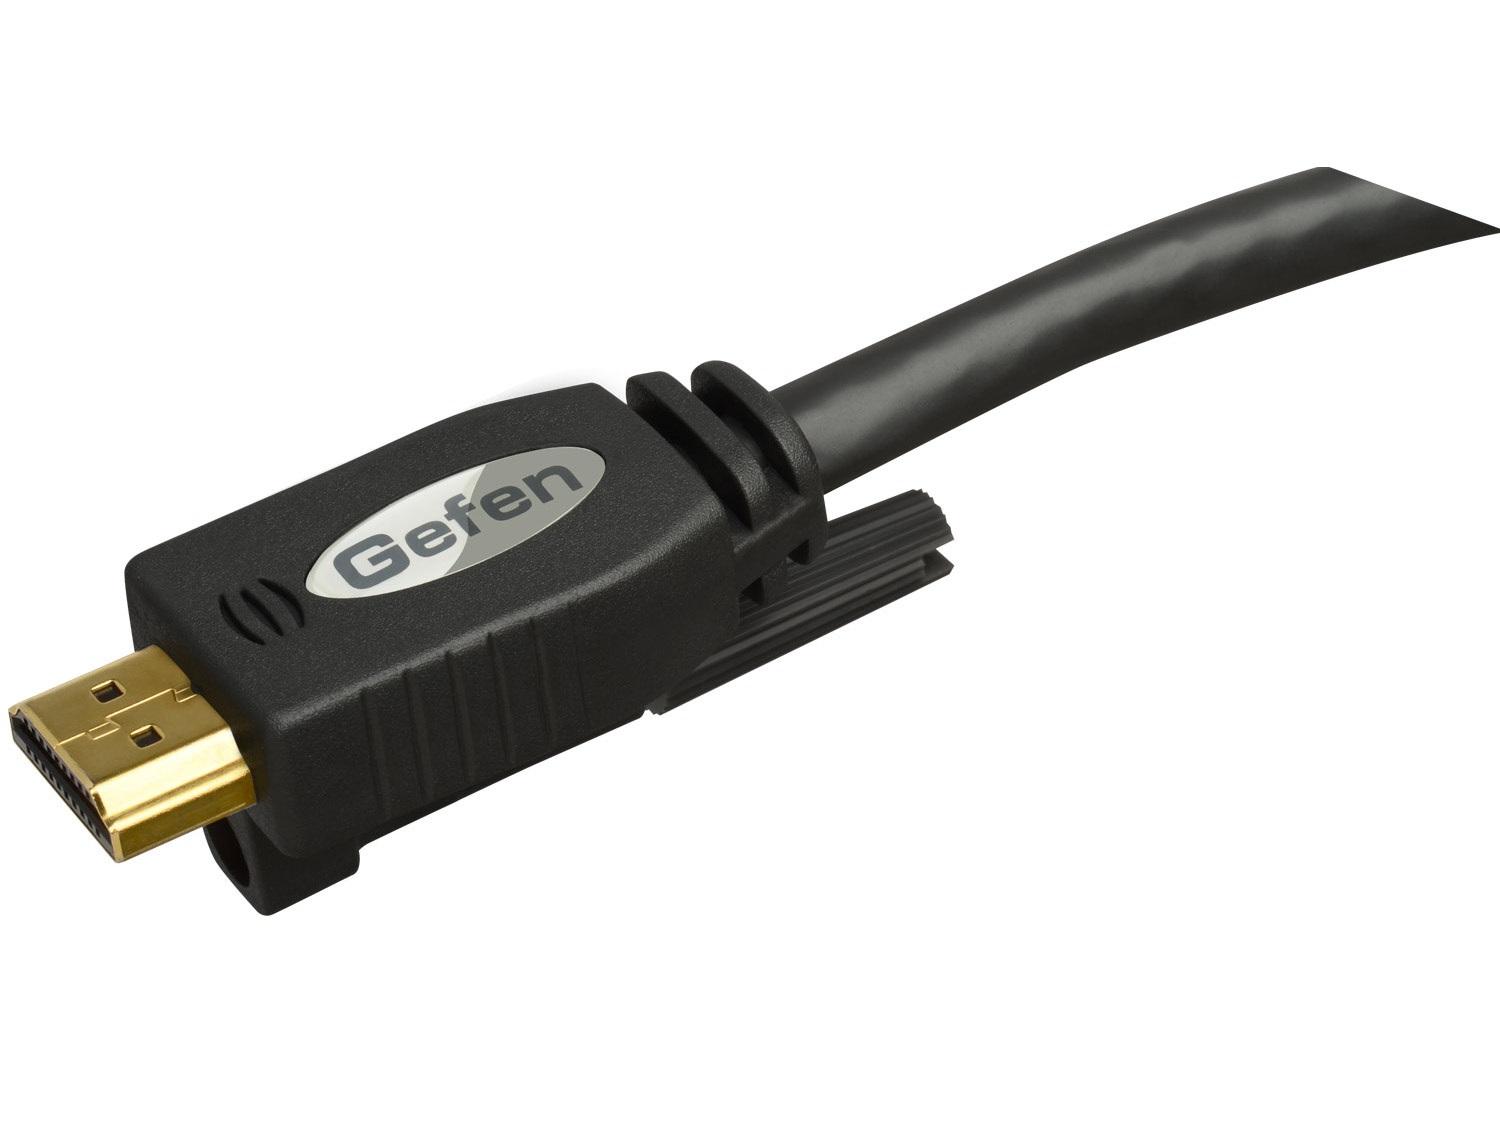 CAB-HD-LCK-03MM High Speed HDMI Cable with Ethernet/Mono-LOK (M-M) - 3 ft by Gefen